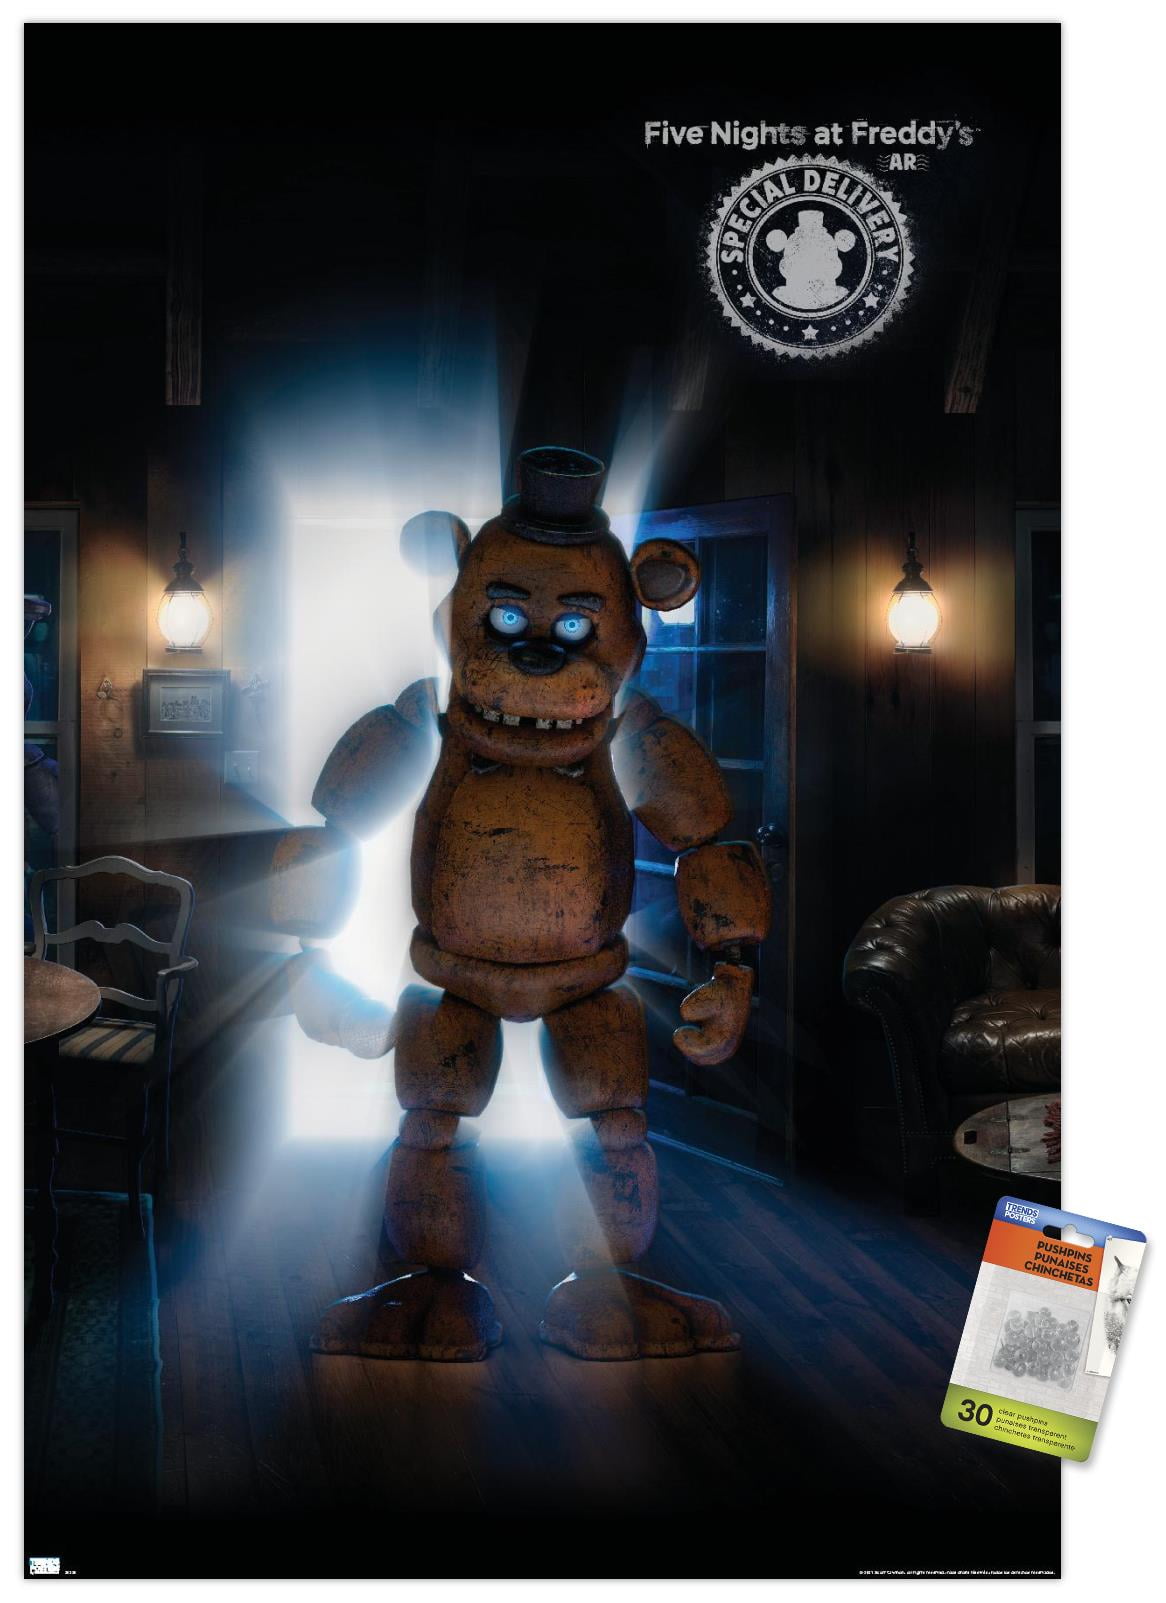 Long-awaited 'Five Nights at Freddy's' movie frightens, fulfills  expectations, The Dose